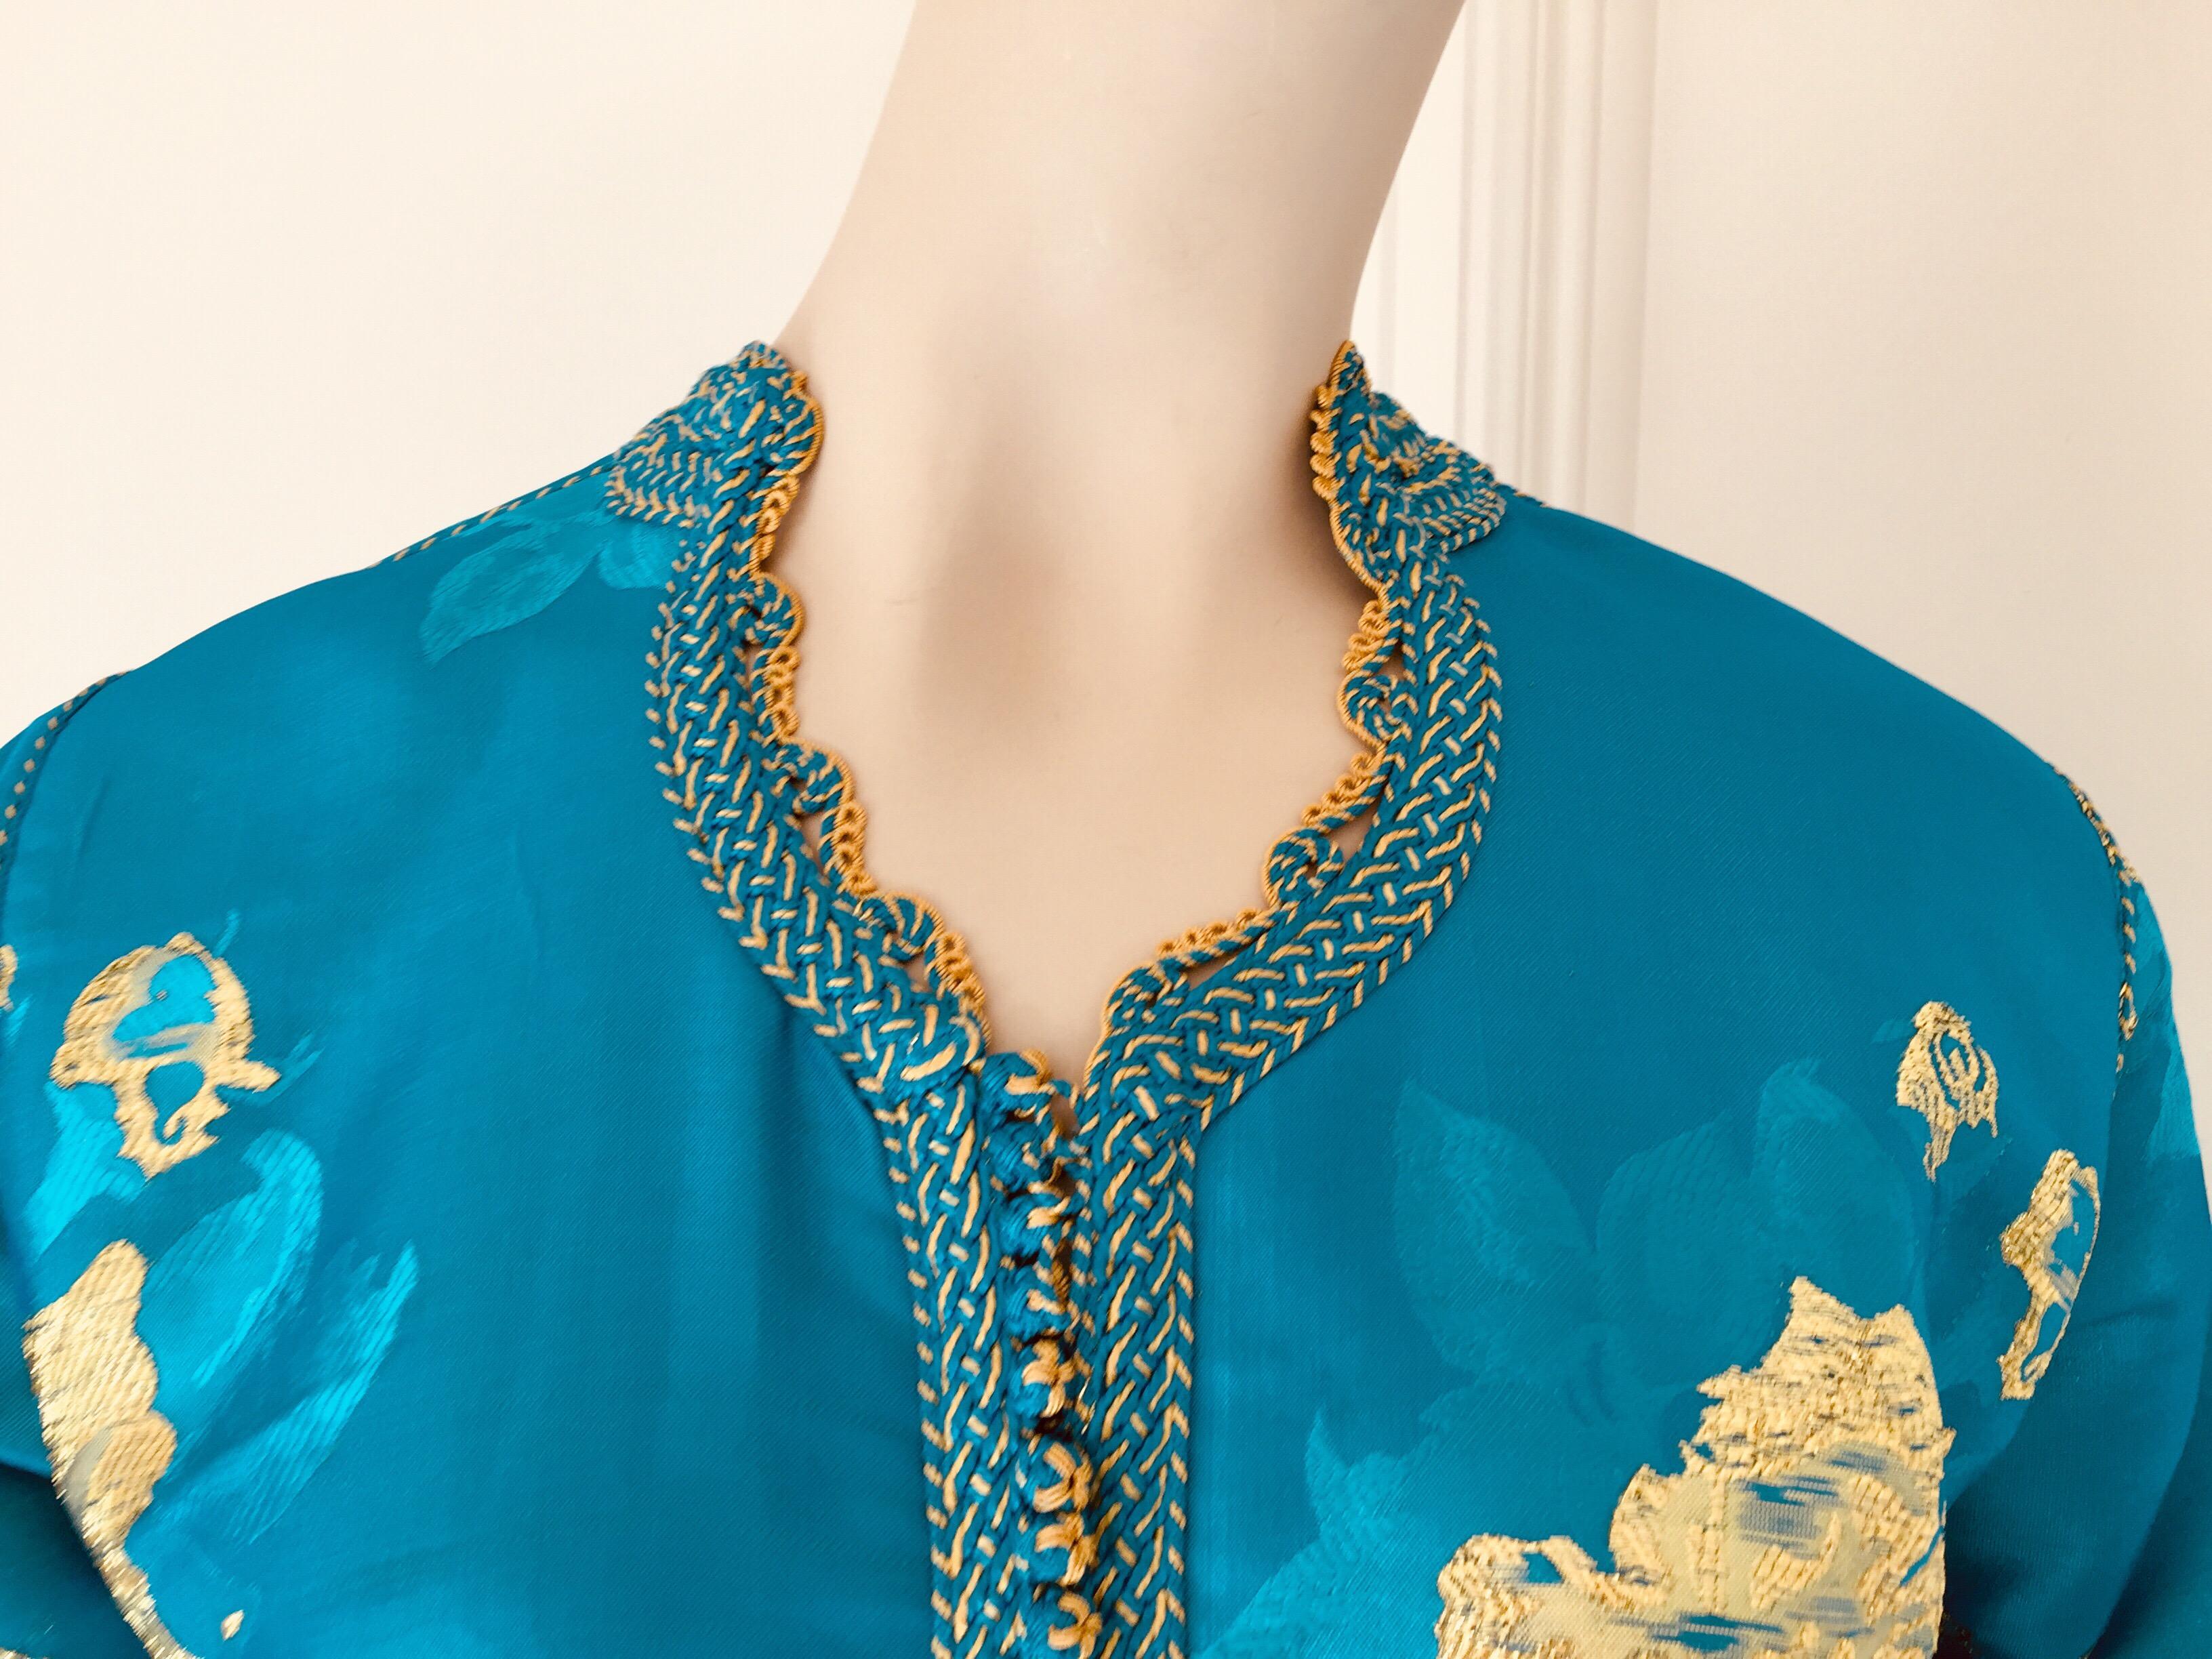 20th Century Moroccan Vintage Kaftan in Turquoise and Gold Floral Brocade Metallic Lame